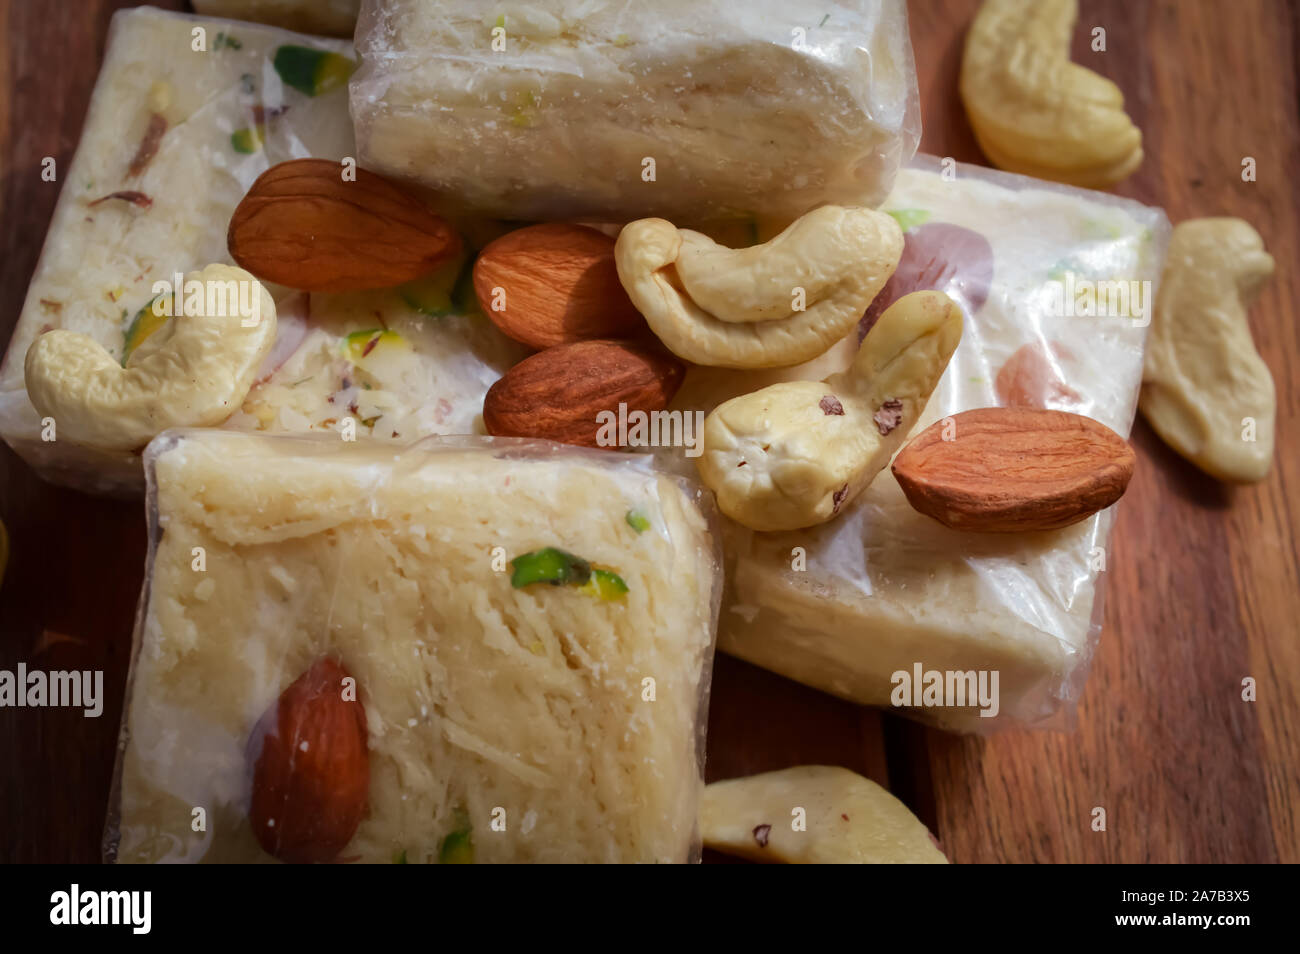 sonpapdi and nuts on wooden table,soanpapdi top view Stock Photo